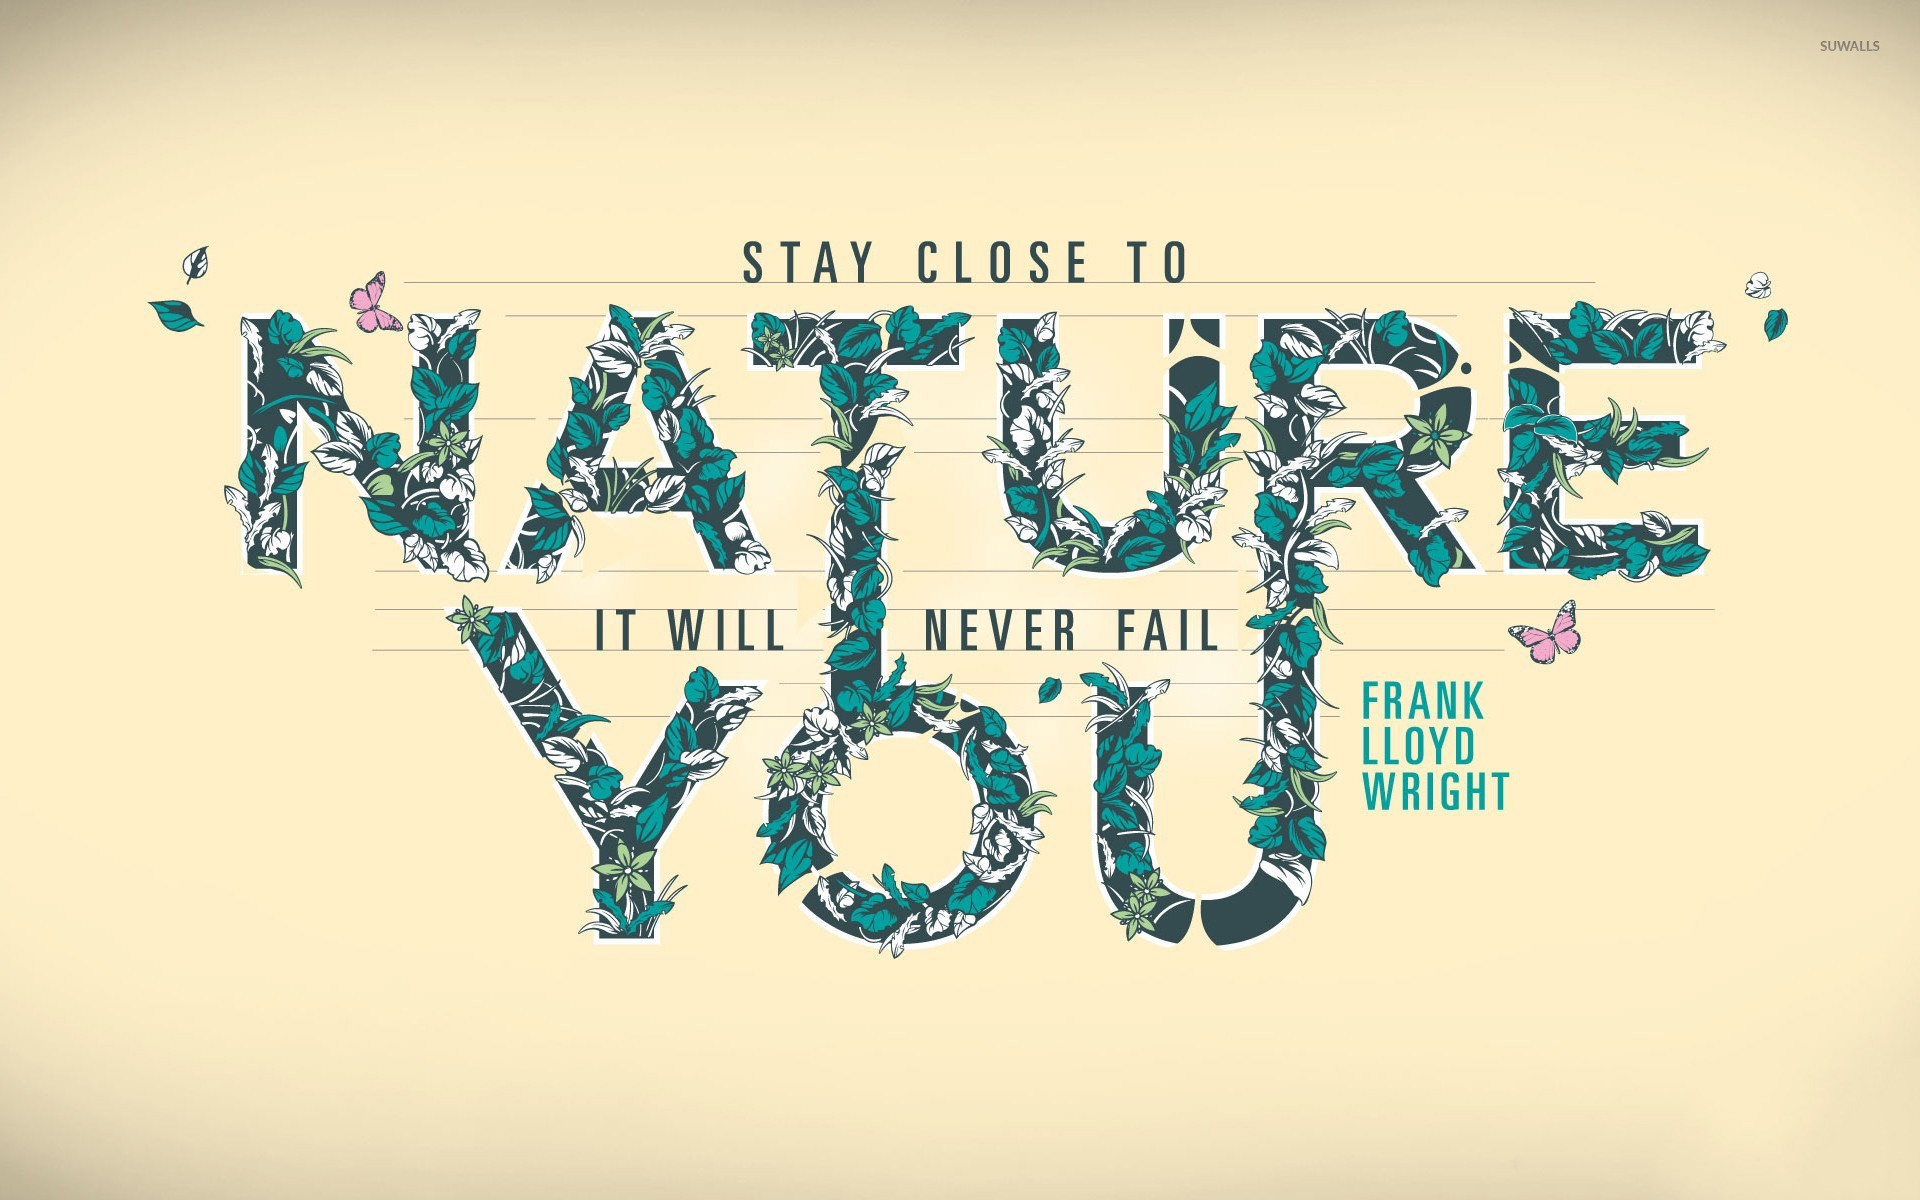 digital art, Text, Letter, Simple background, Minimalism, Nature, Frank Lloyd Wright, Quote, Butterfly, Flowers, Leaves, Plants, Motivational, Positive Wallpaper